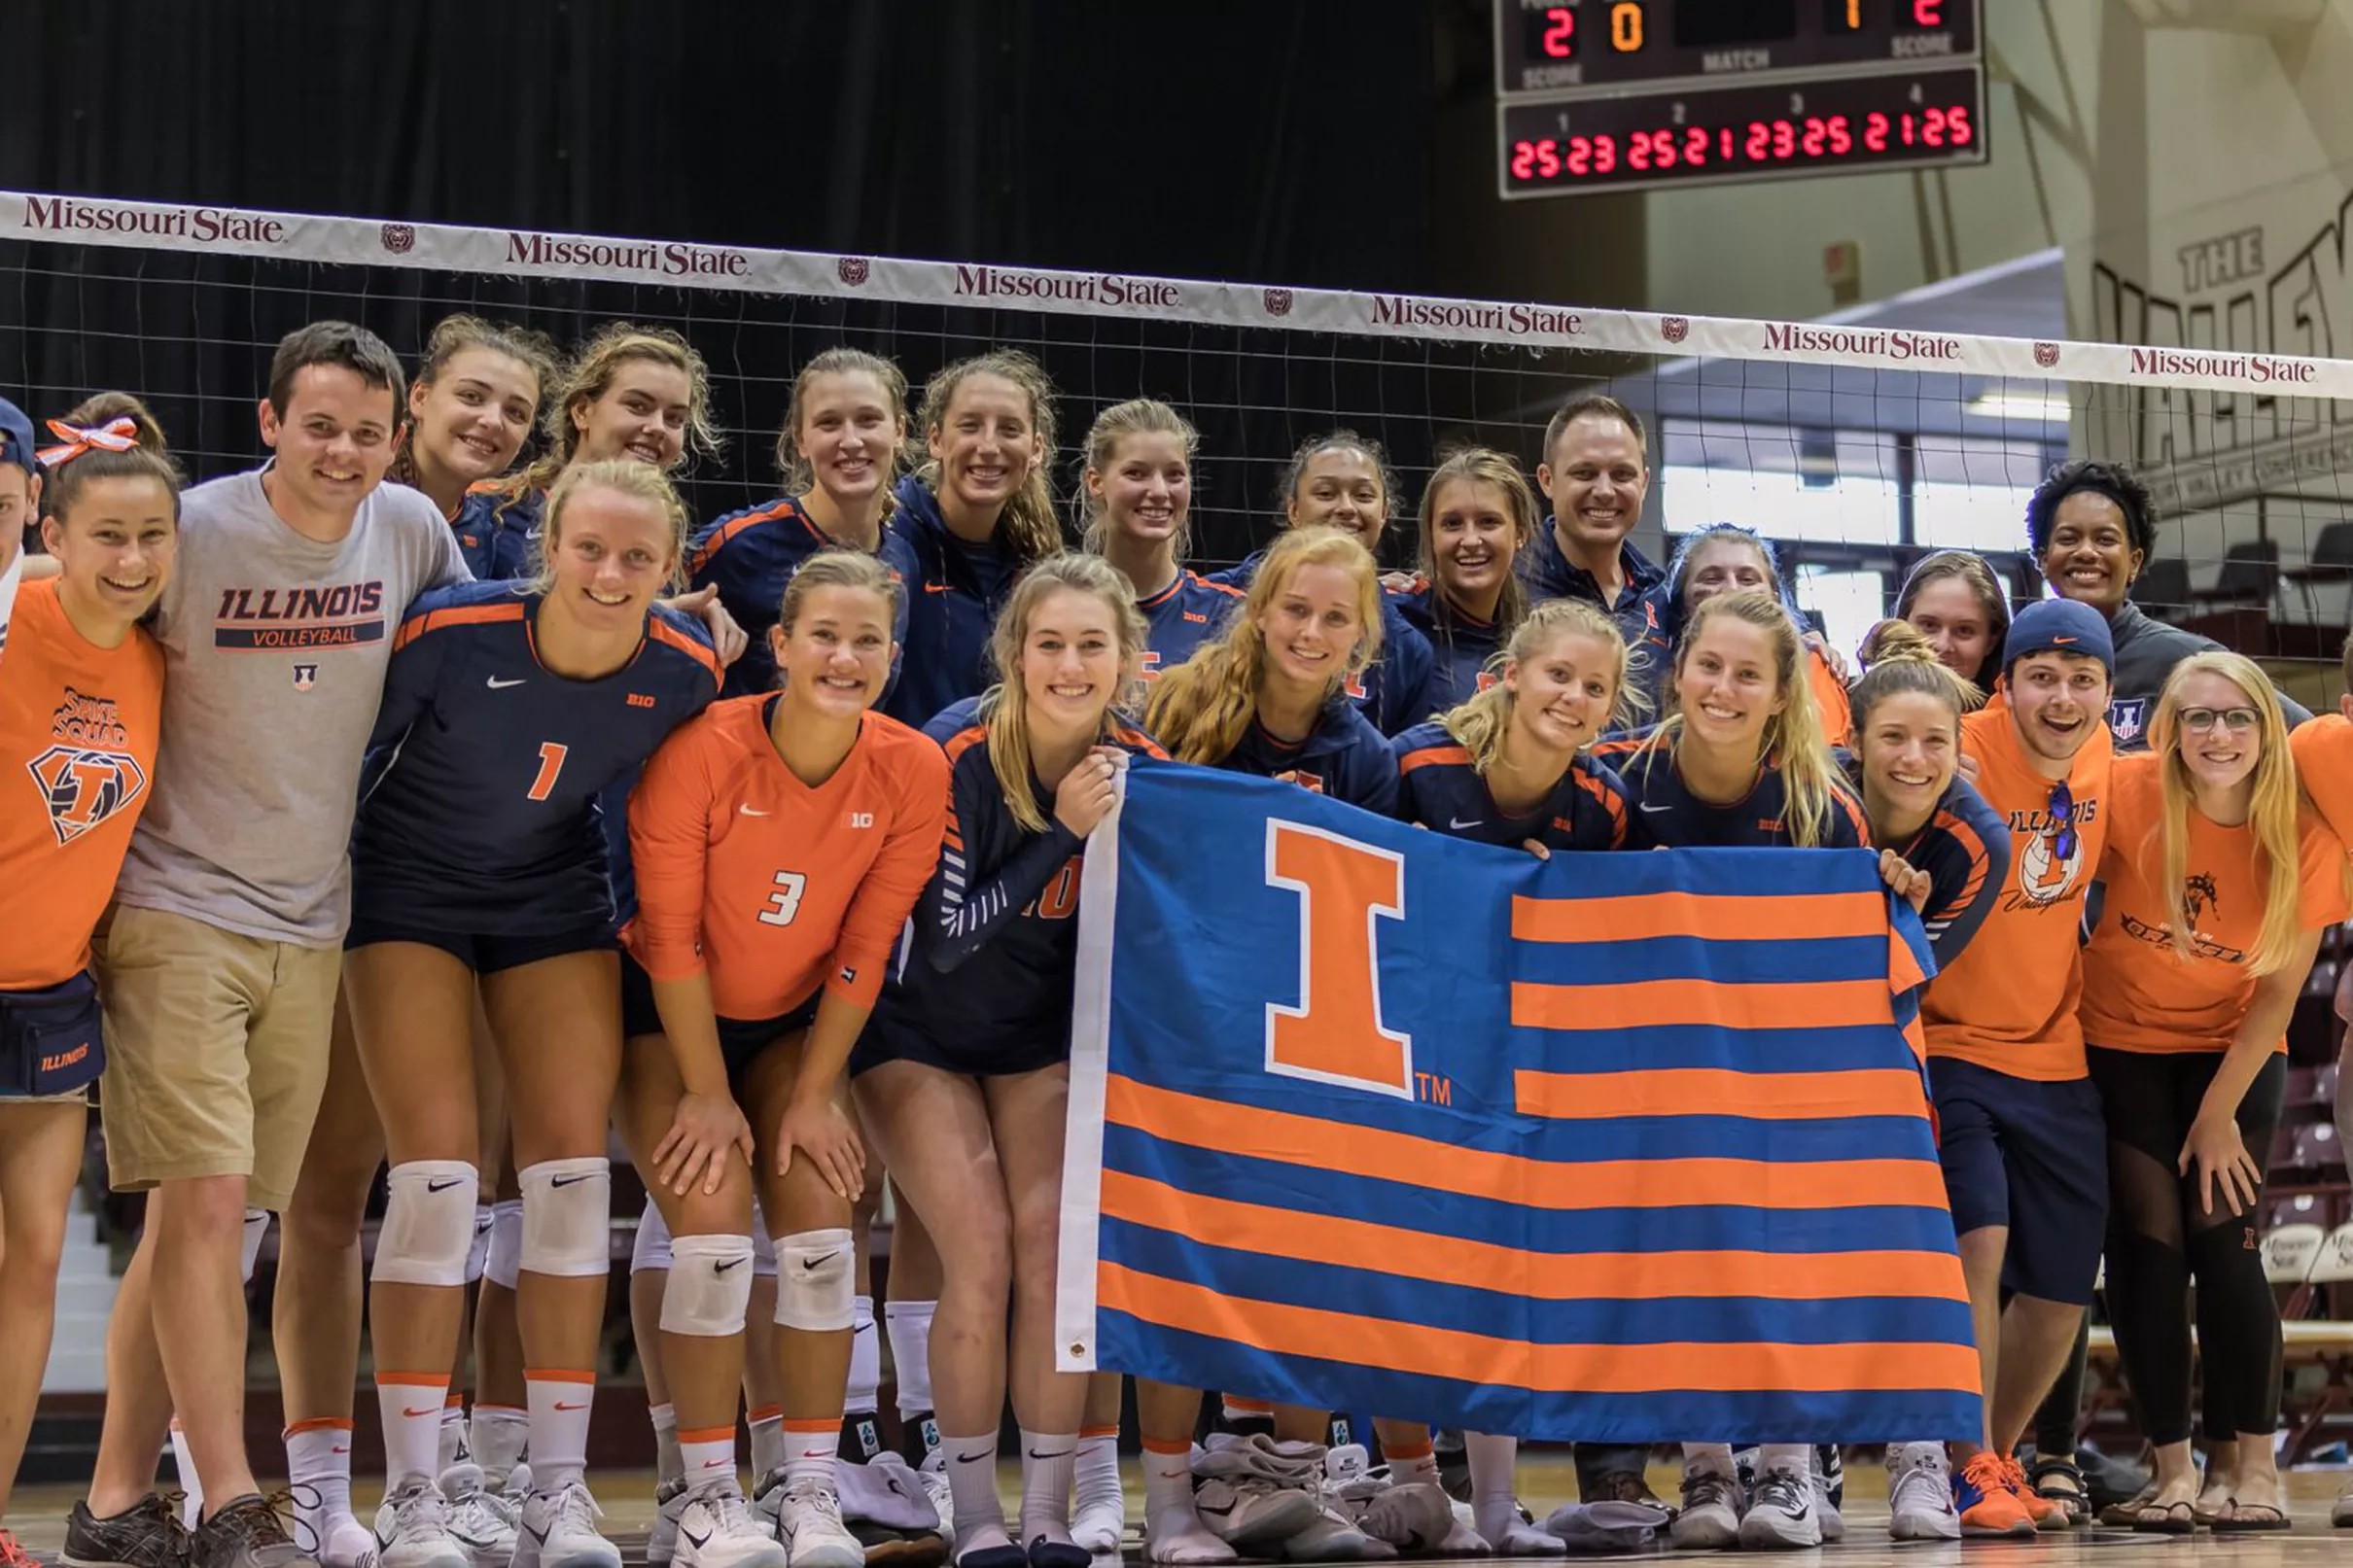 Illinois volleyball looks to carry strong start into Big Ten schedule